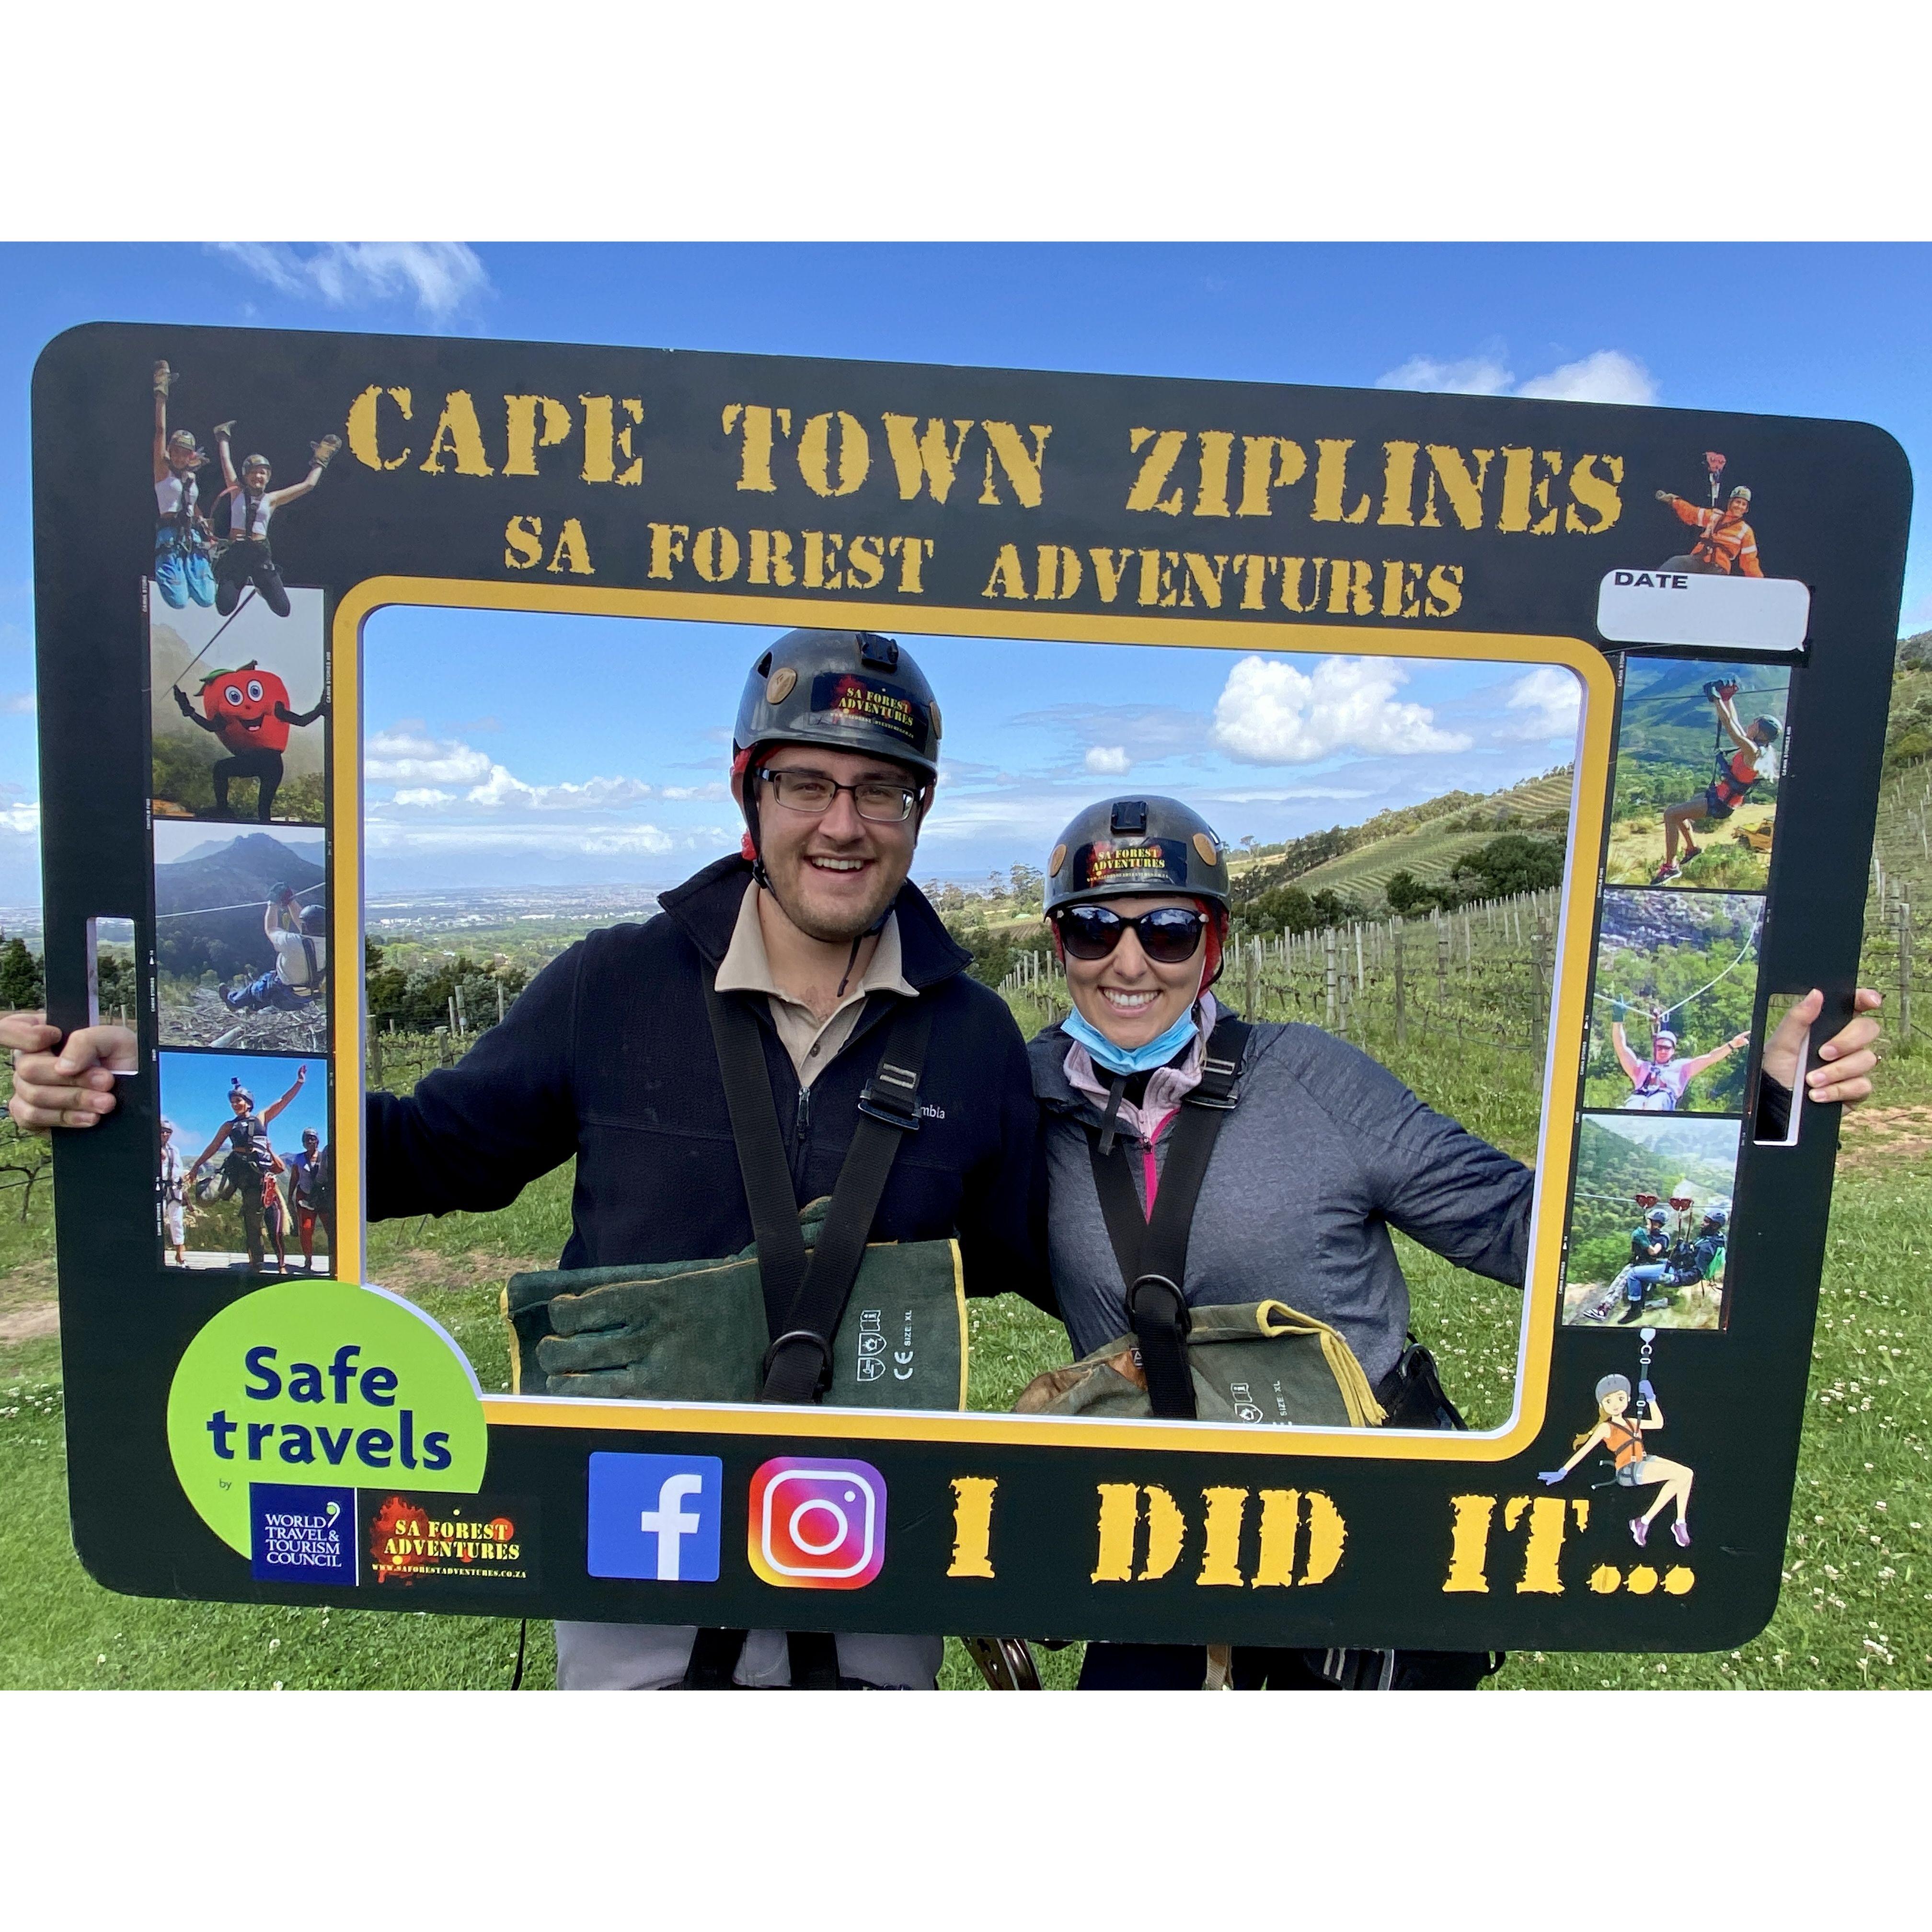 Fred and Jordan zip lined above some of the most beautiful Cape Town wineries!